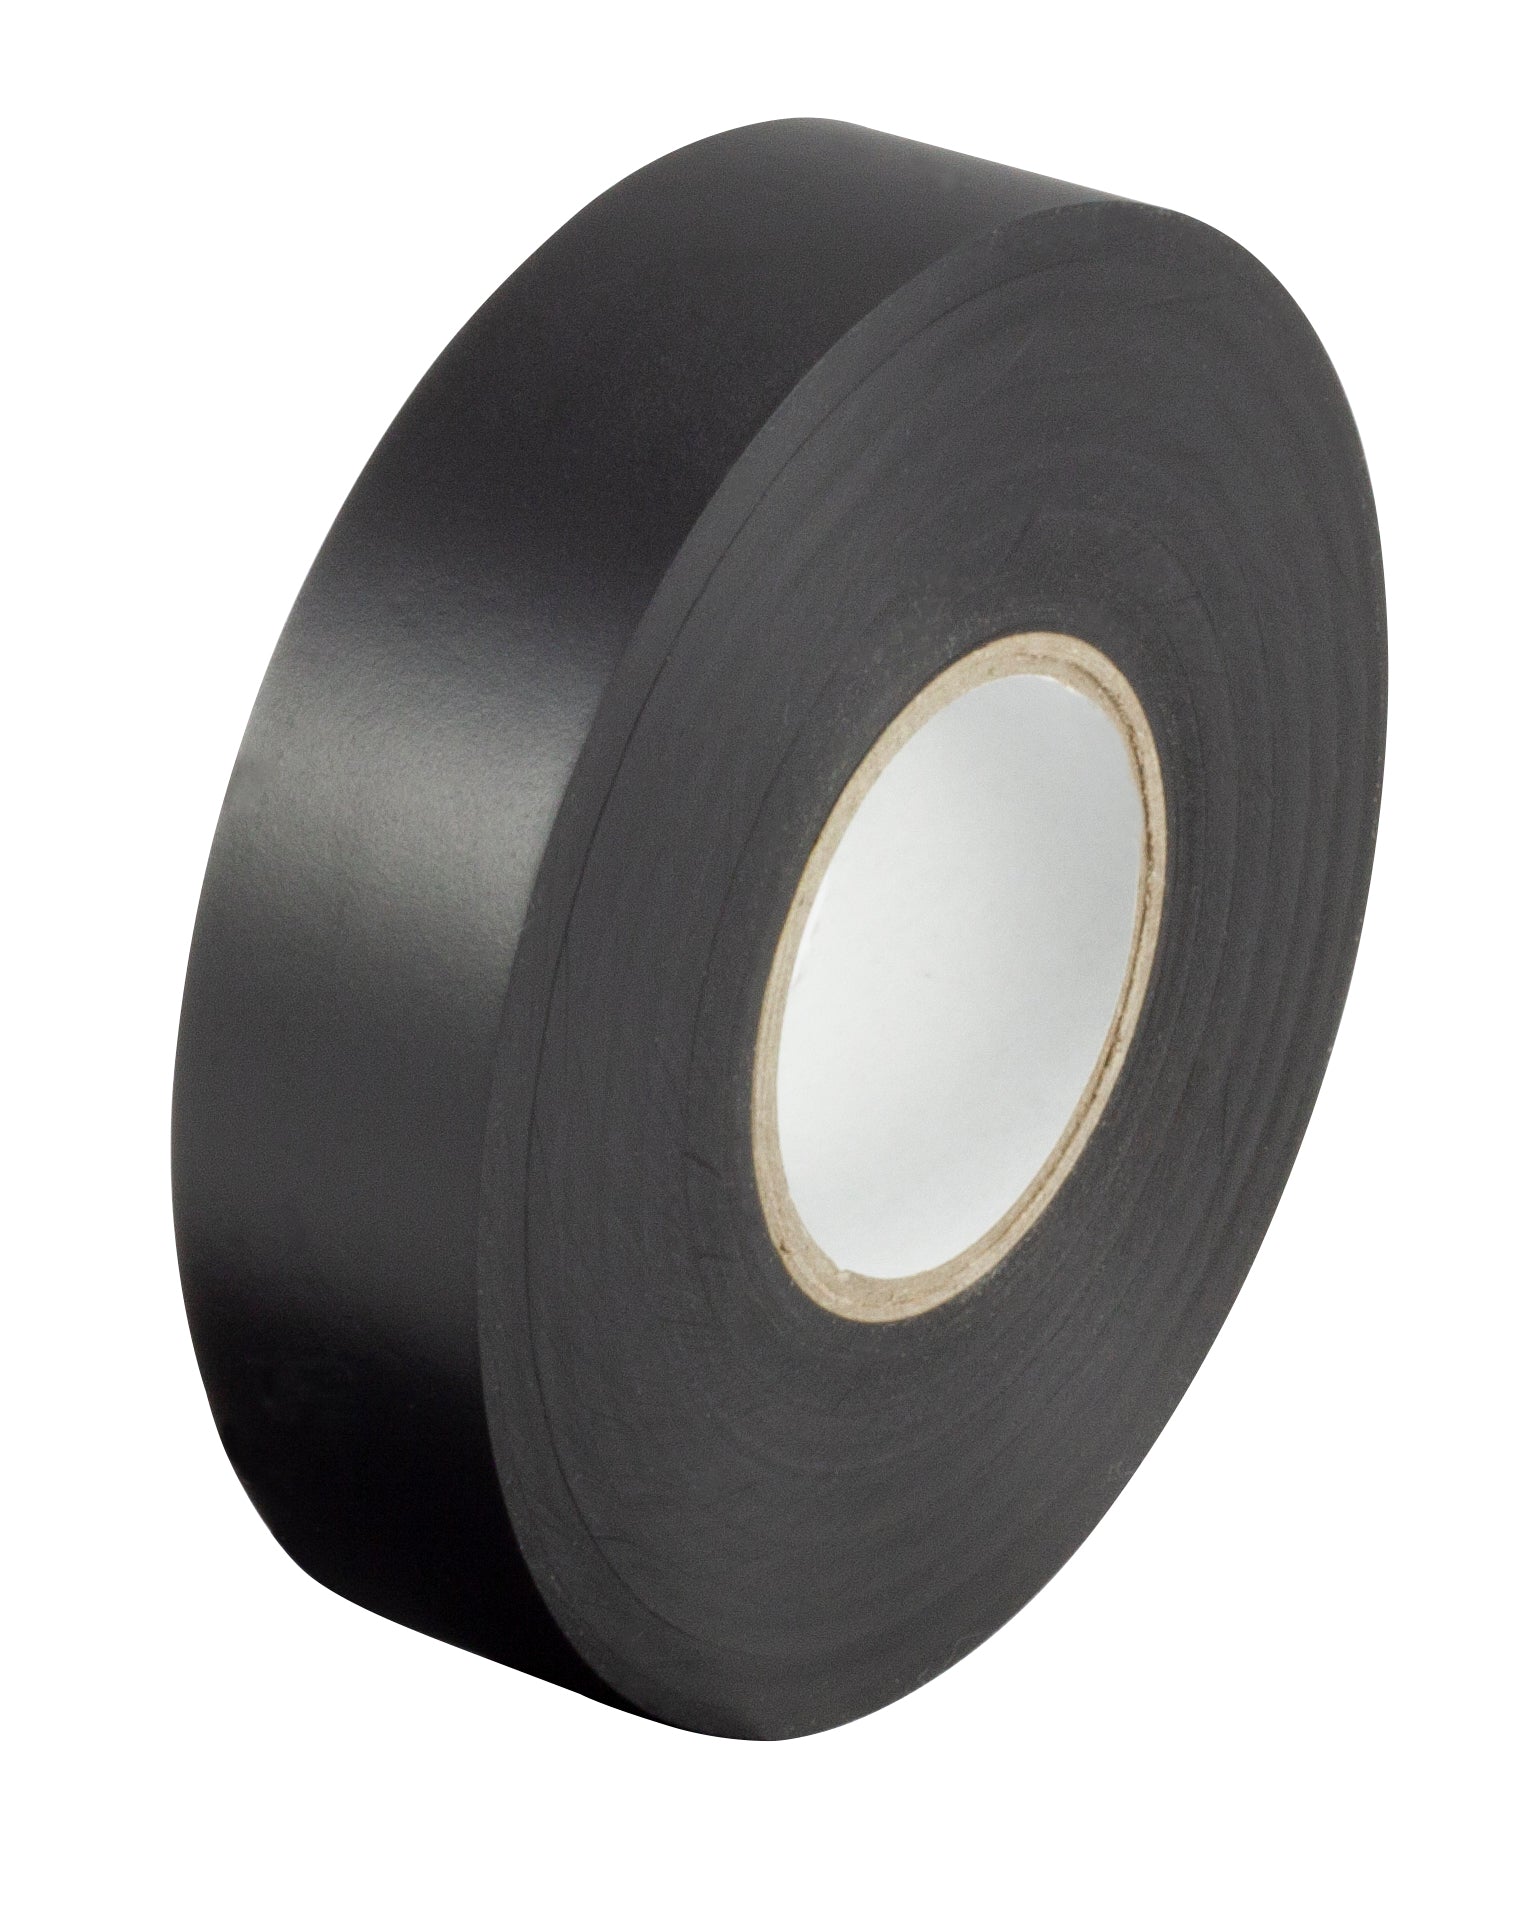 PVC Tape Size: 19mmx33m Roll - BLACK - Pack of 10